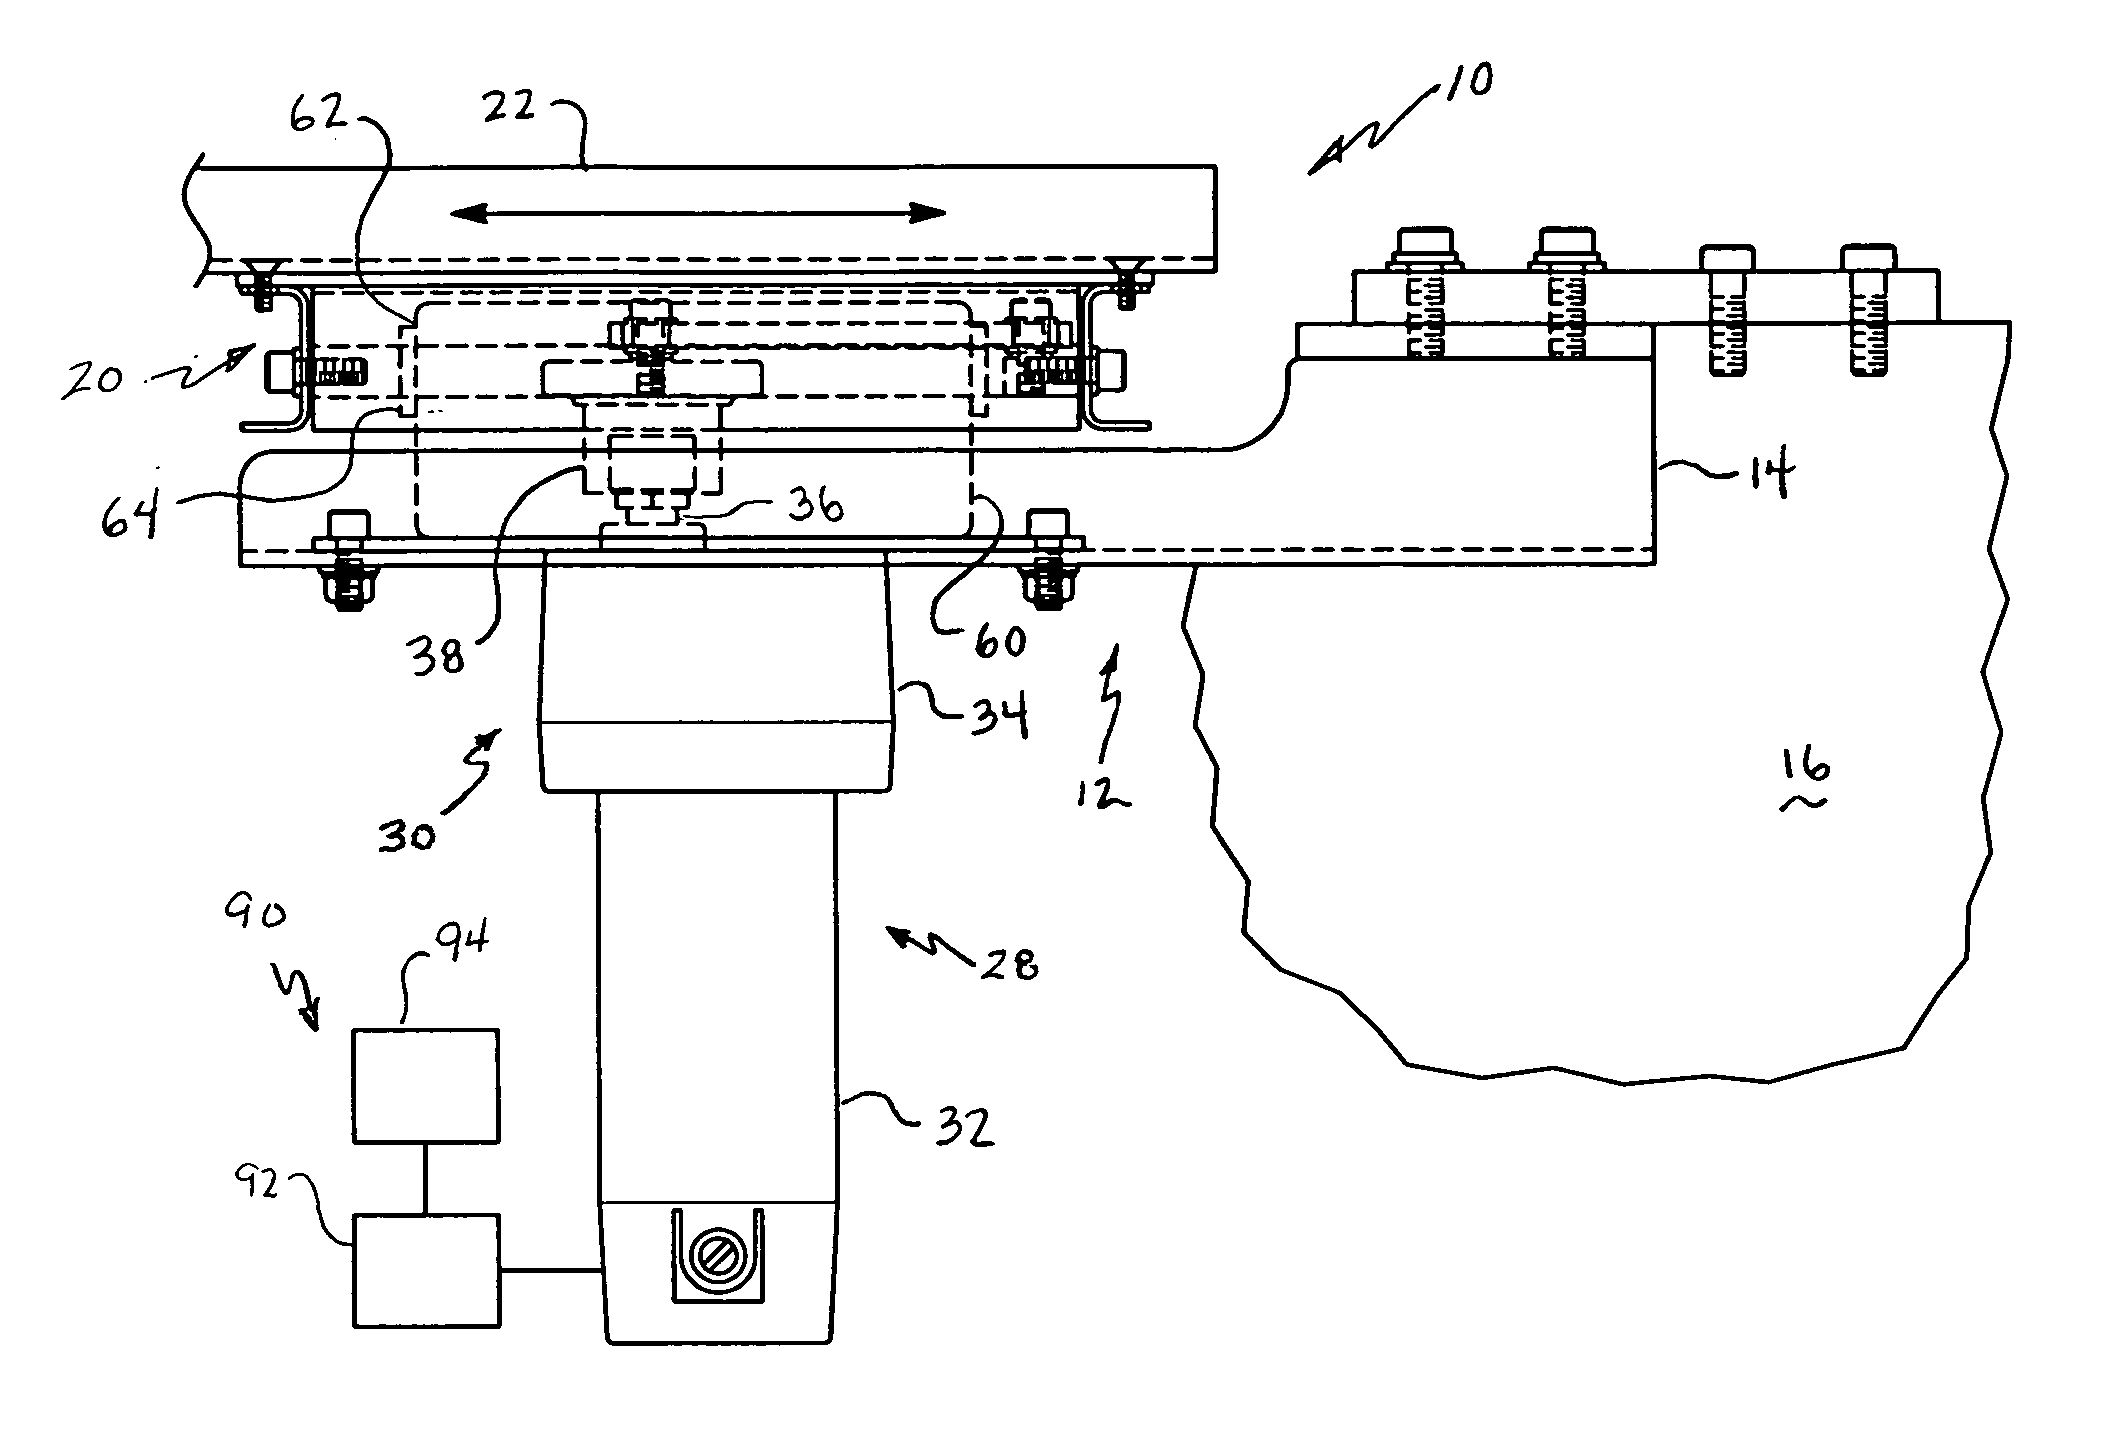 Shaker conveyor assembly having an electronically controllable stroke speed